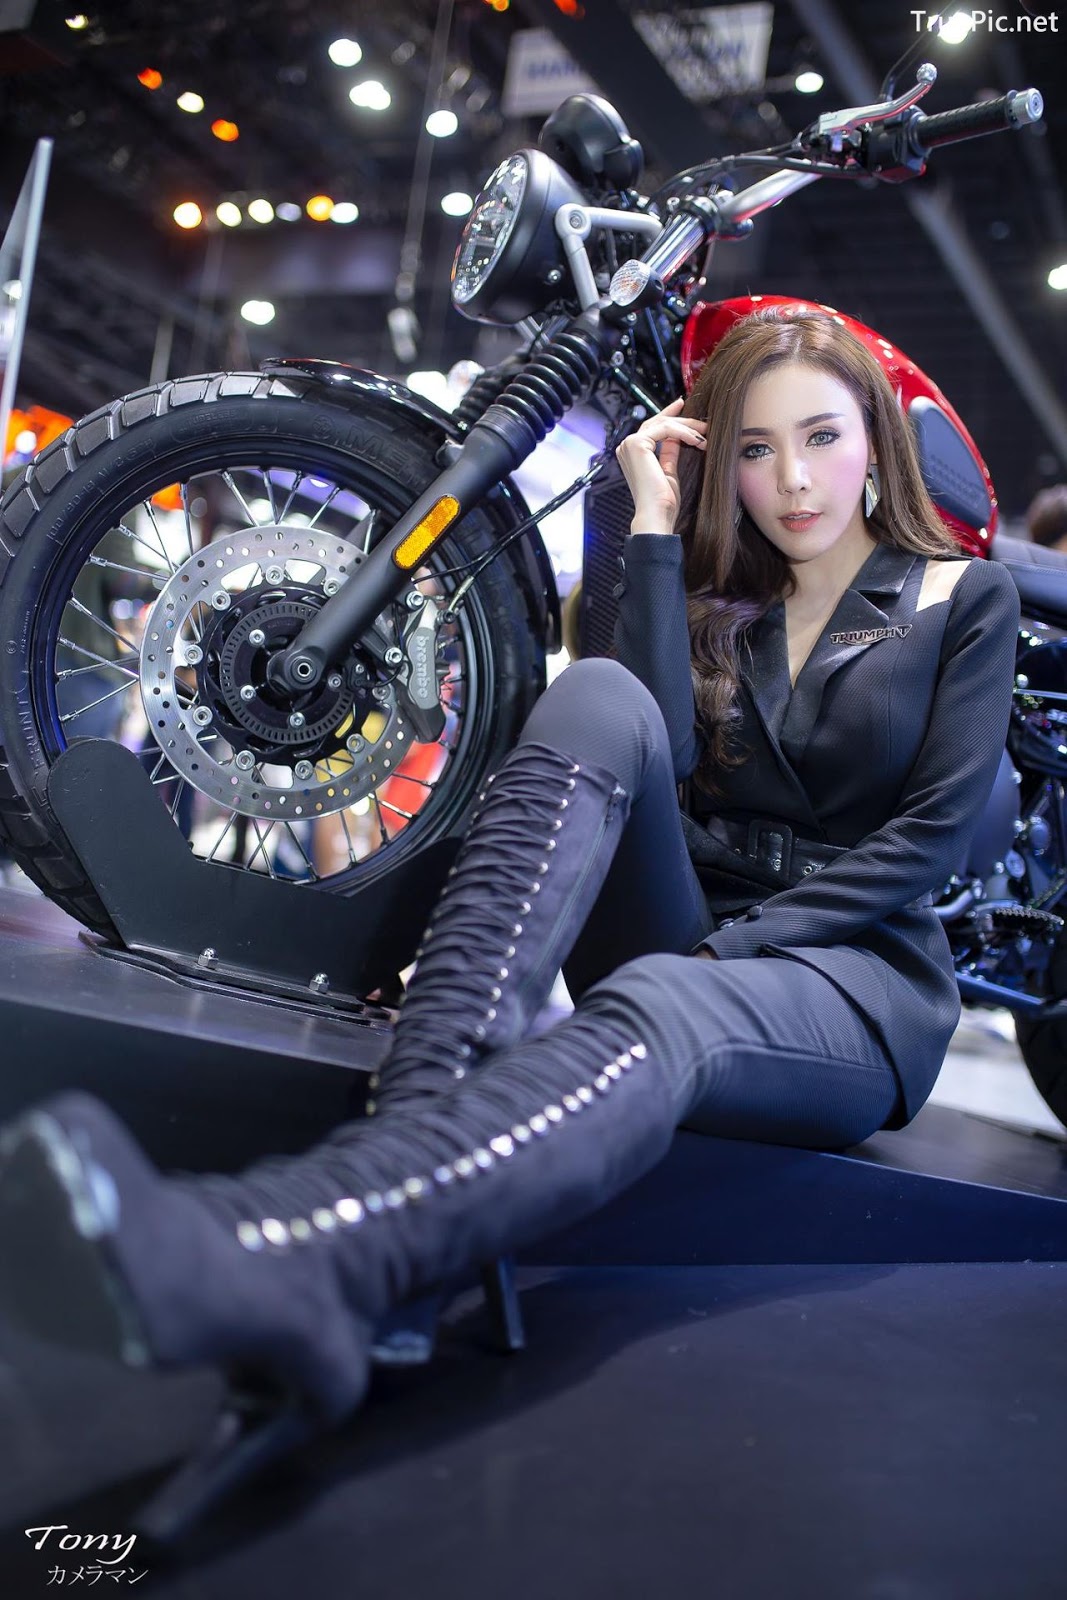 Image-Thailand-Hot-Model-Thai-Racing-Girl-At-Motor-Expo-2018-TruePic.net- Picture-113